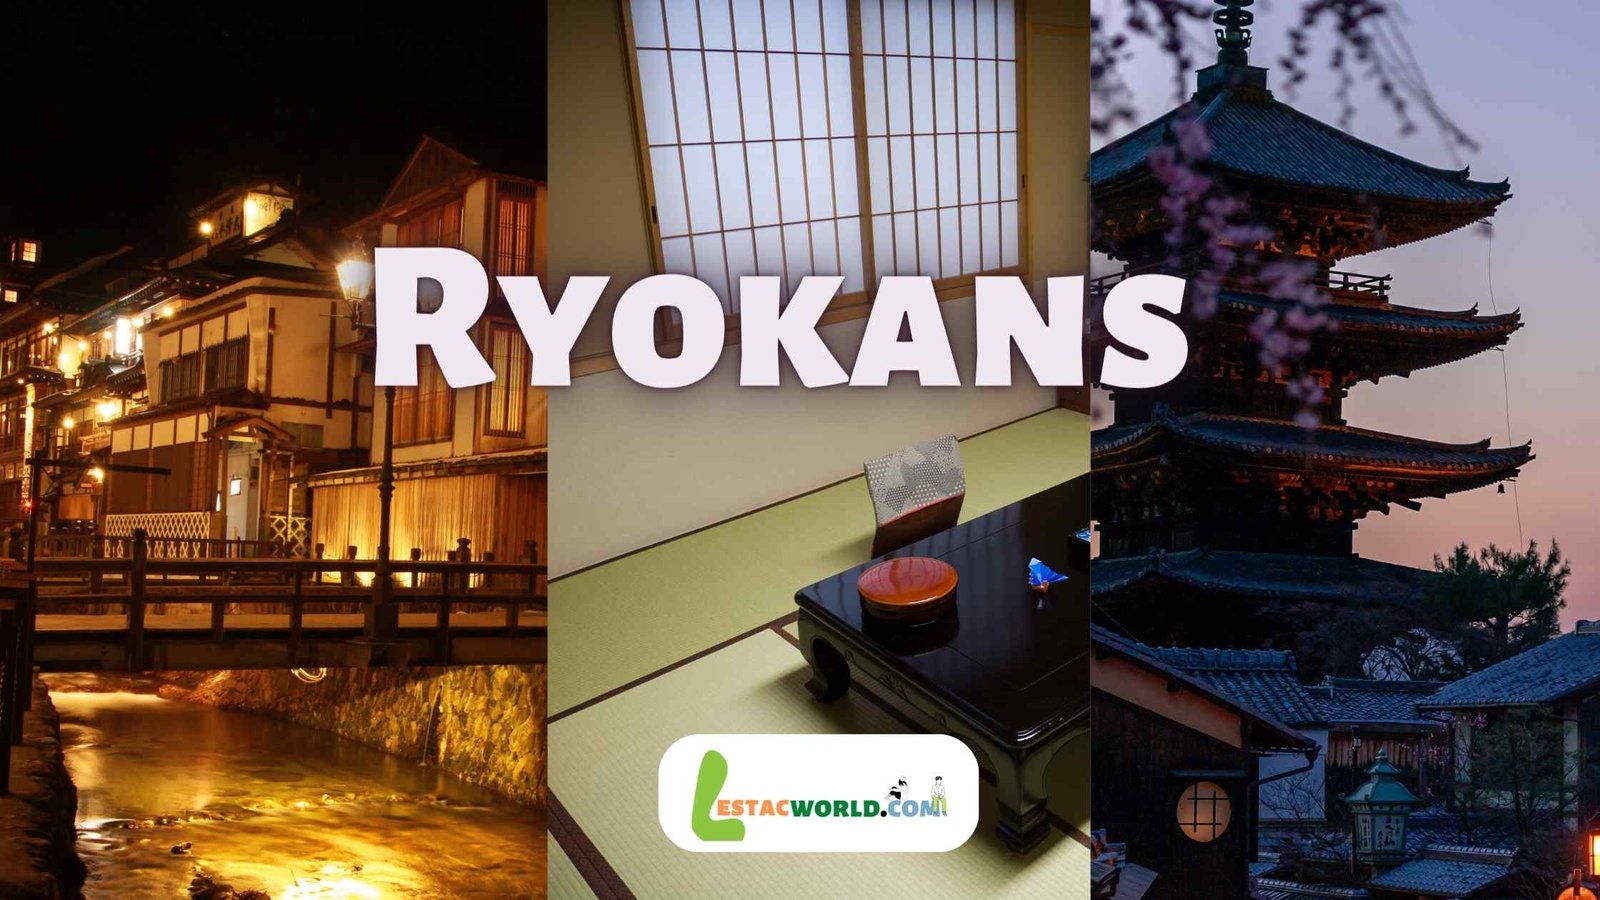 about Ryokans in Tokyo